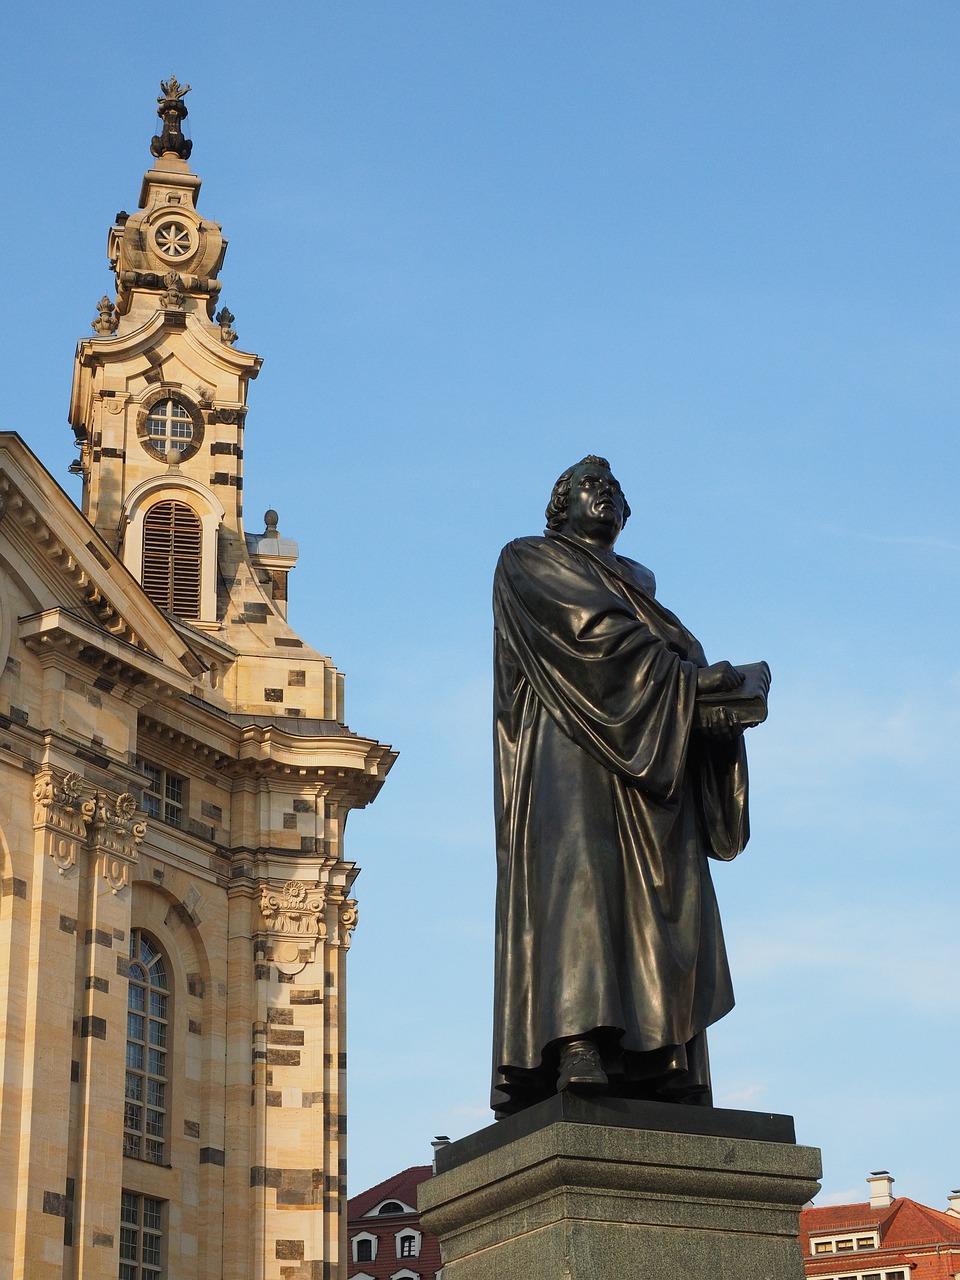 Why did Martin Luther go against the Catholic Church? 